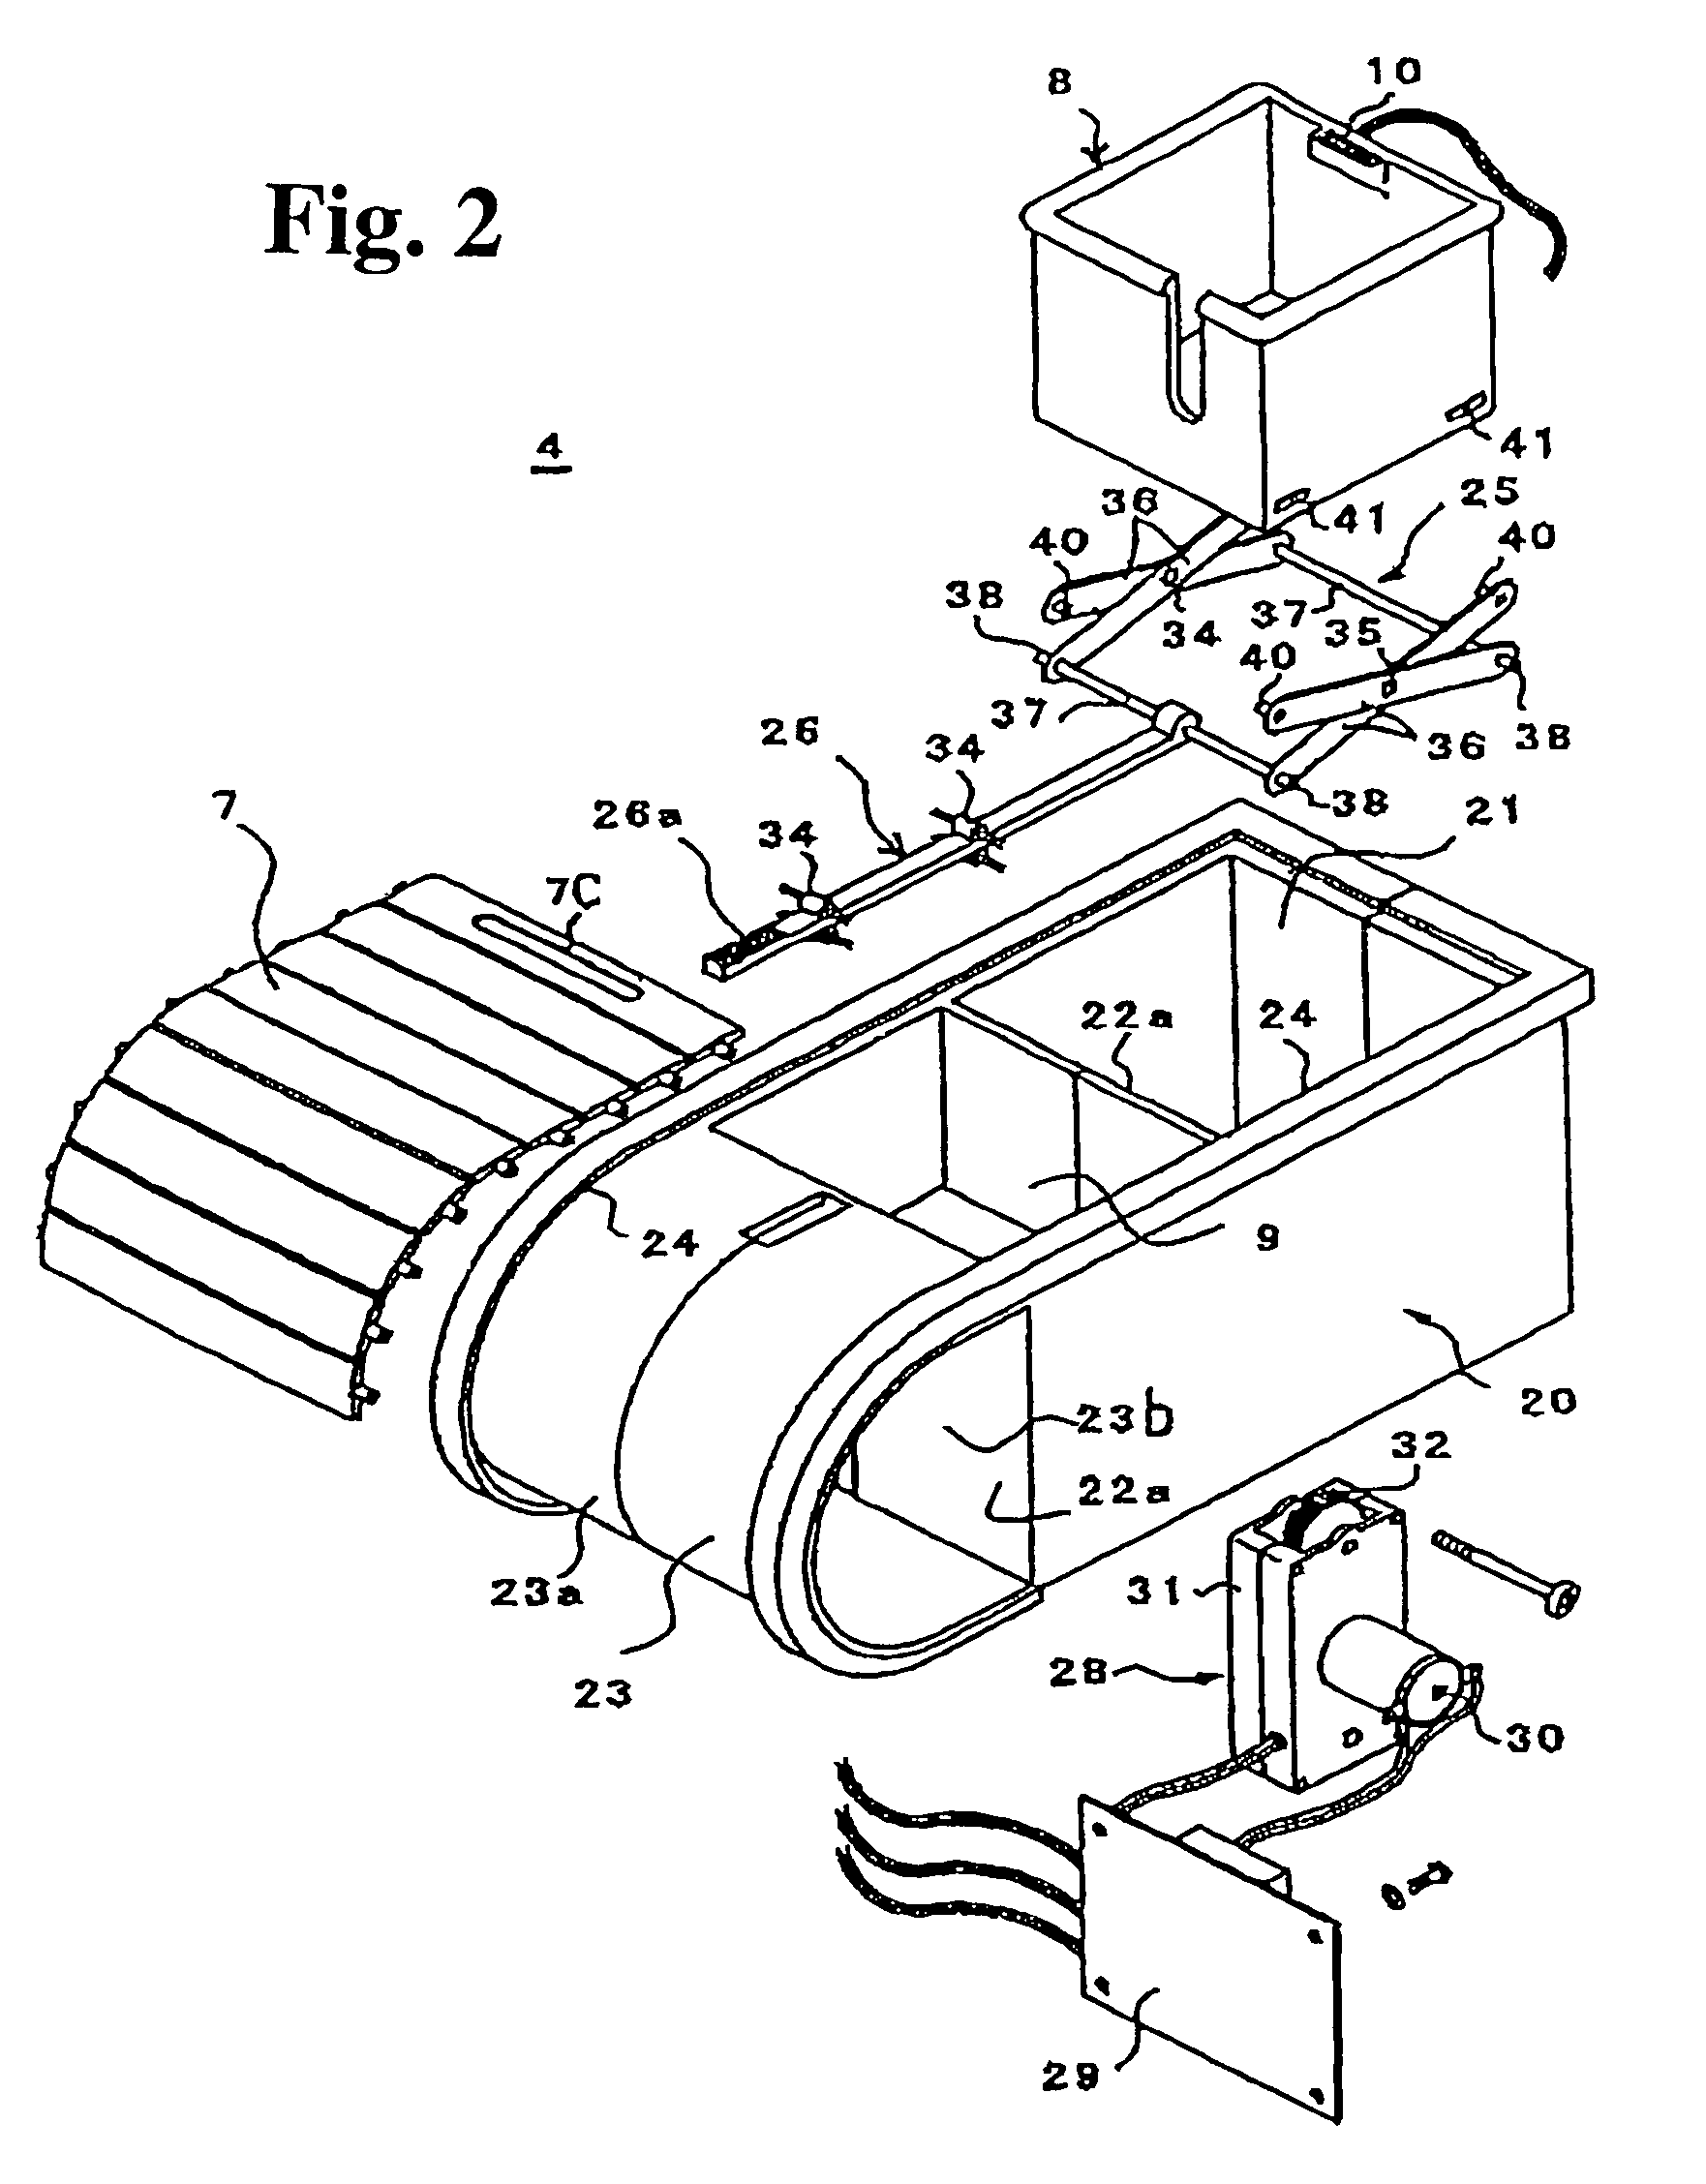 Configuration for operating interior device and cup holder using the same